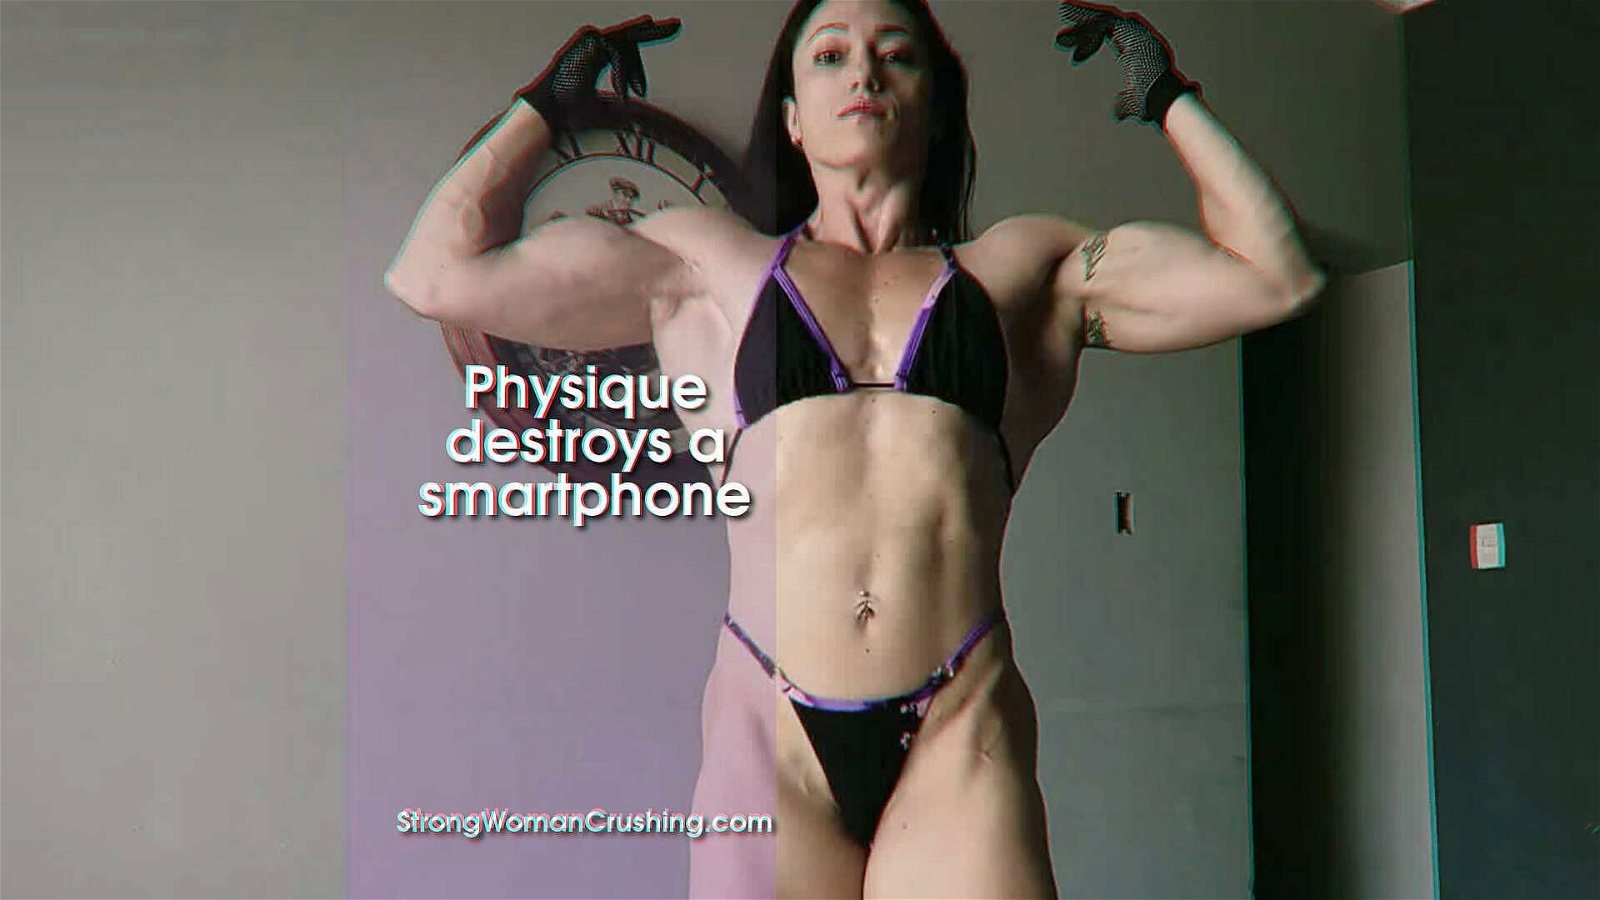 Watch the Photo by MusclegirlStrength with the username @MusclegirlStrength, who is a brand user, posted on March 5, 2024 and the text says 'Physique destroys a smartphone
Full Video: fbbstrength.com

Experience the power and beauty of muscular female bodybuilders flexing their muscles, crushing objects, and showcasing their strength on our site now!

#musclegirl #musclegirllove..'